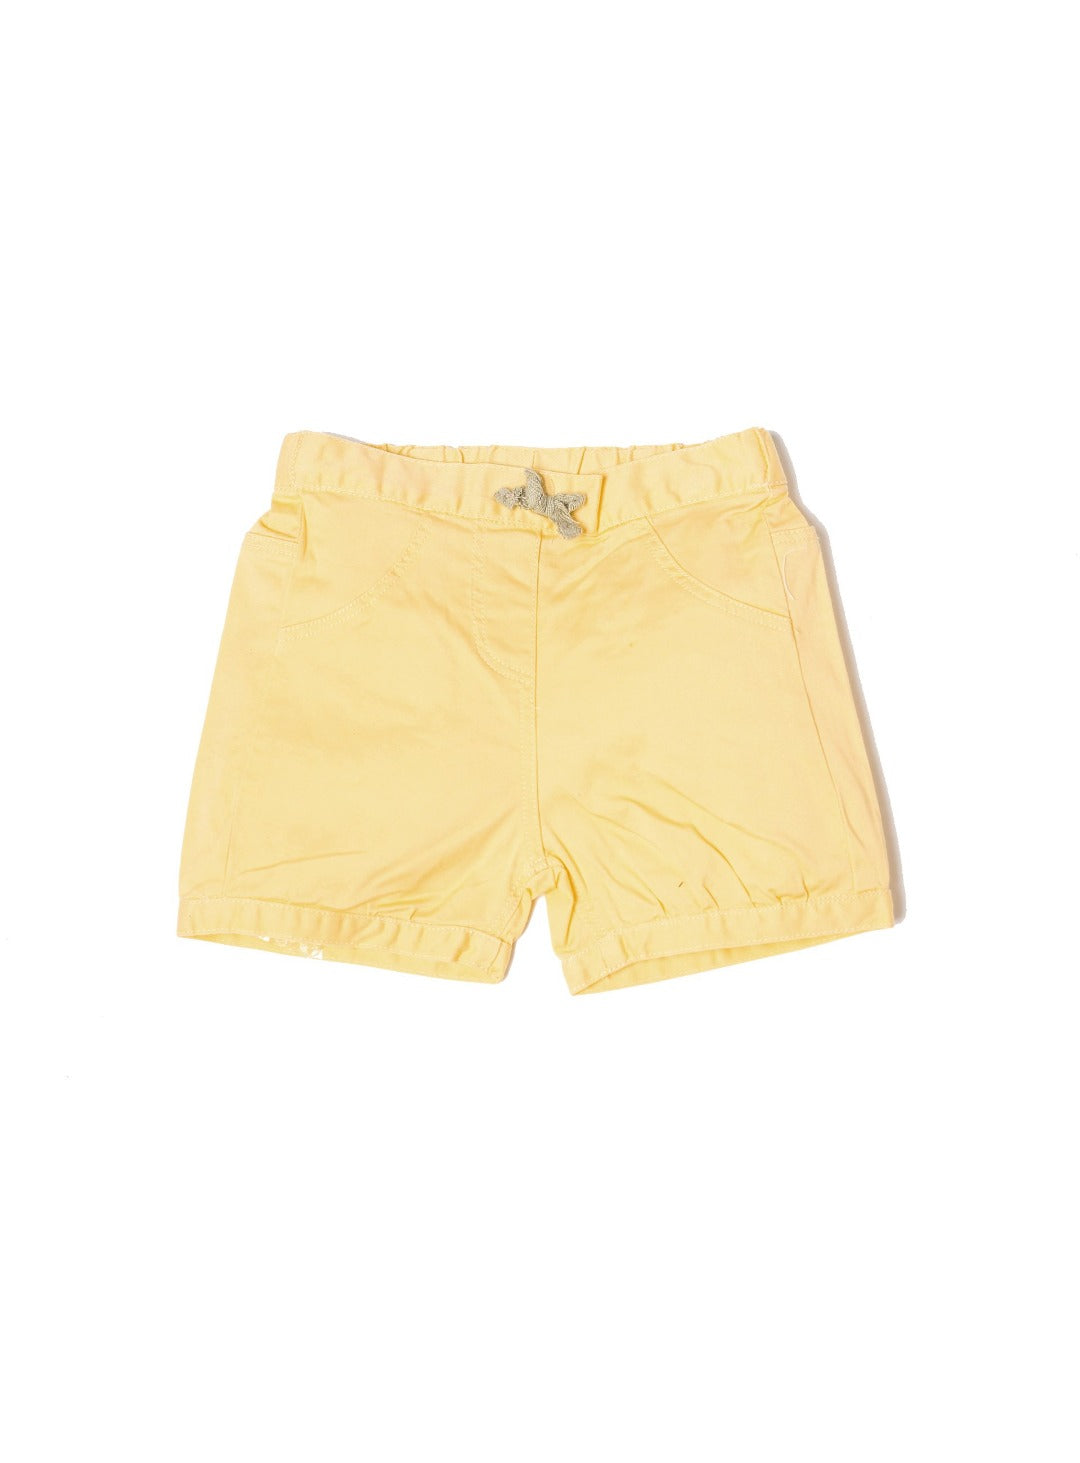 bumblebee yellow shorts with pockets